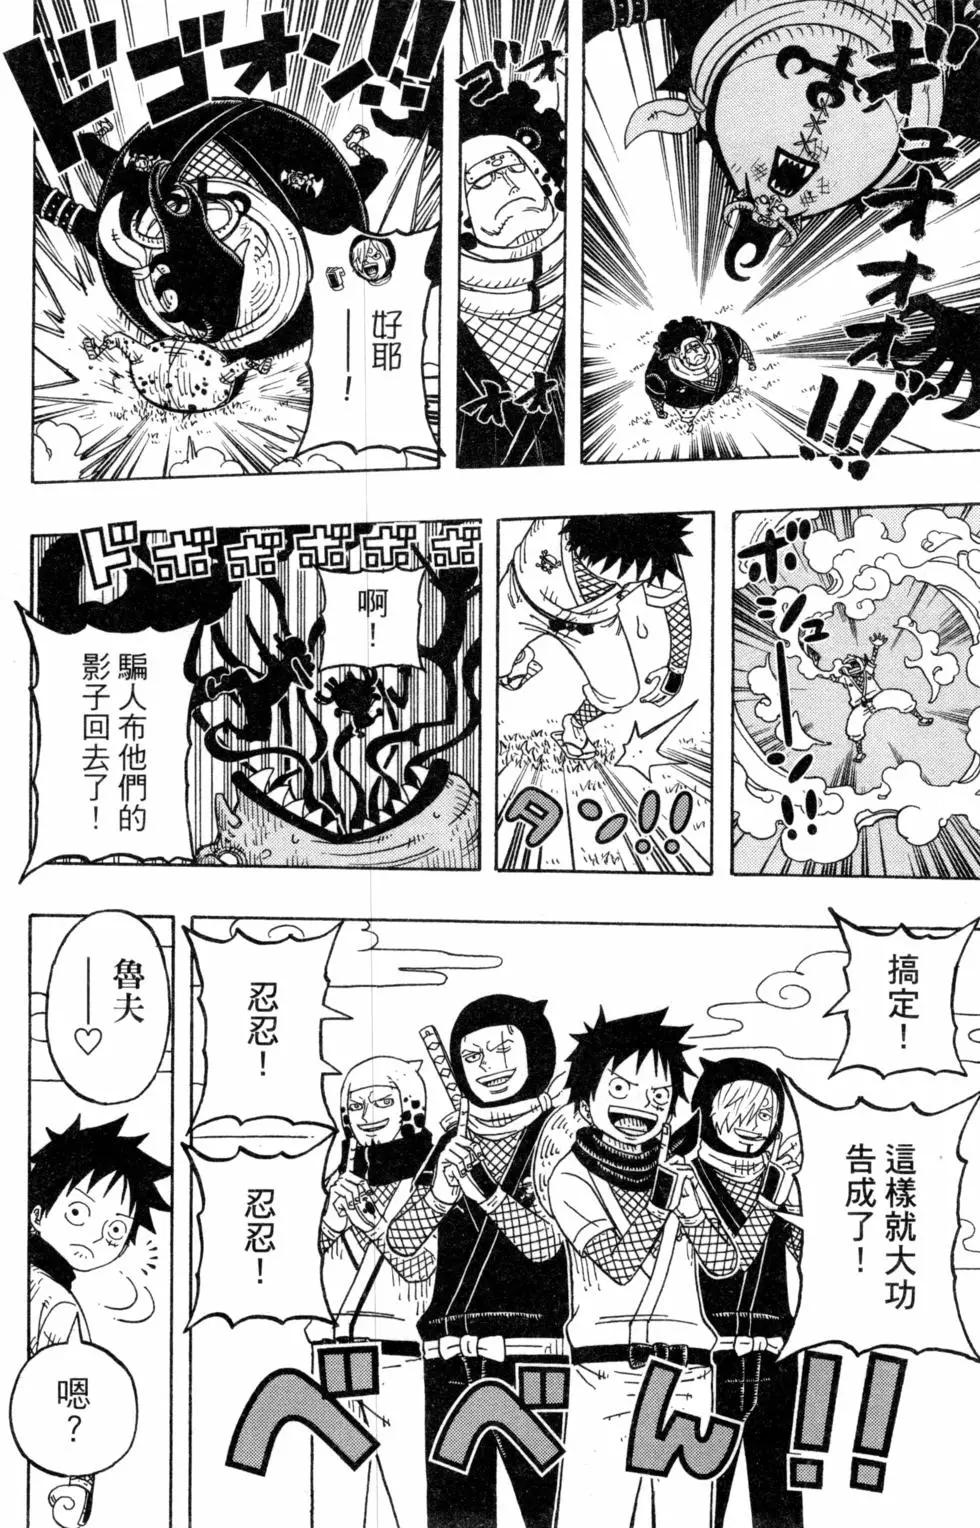 One piece party - 第06卷(1/4) - 7